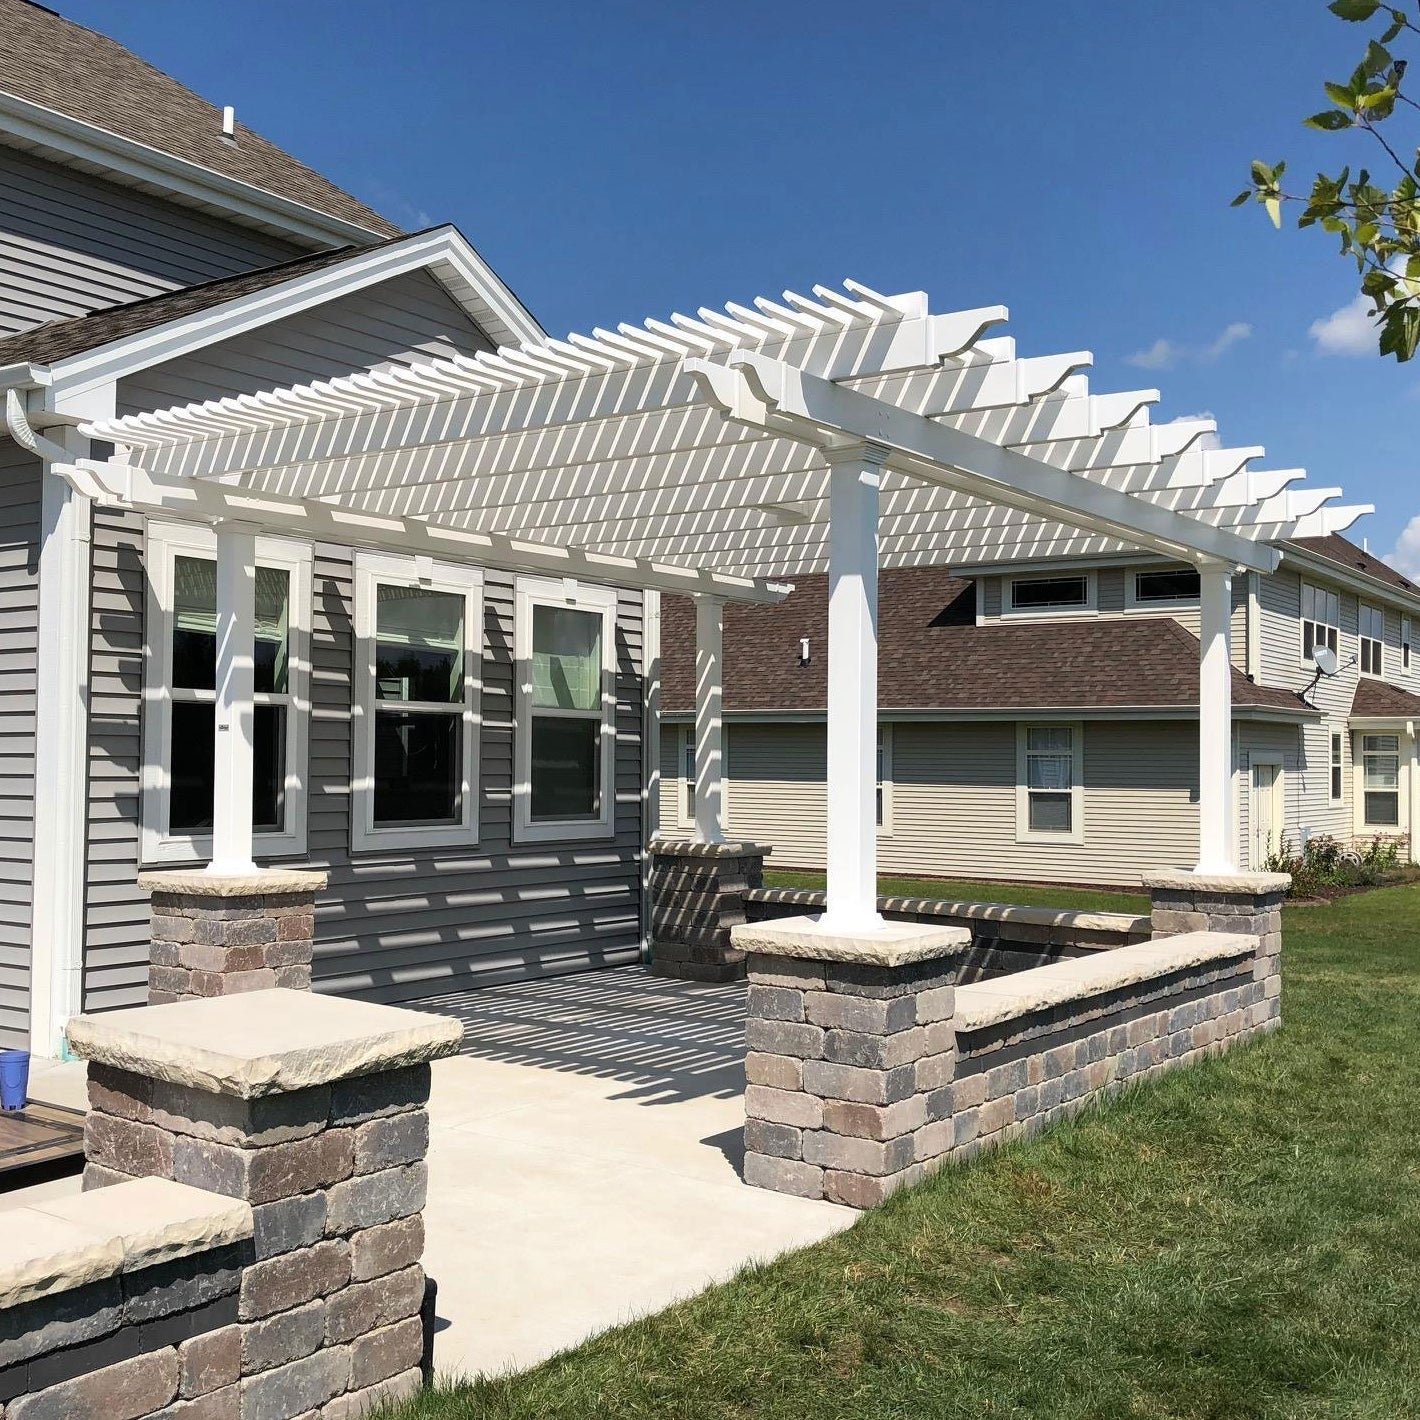 White 4-post traditional pergola with overhangs providing shade for patio near a beautiful house